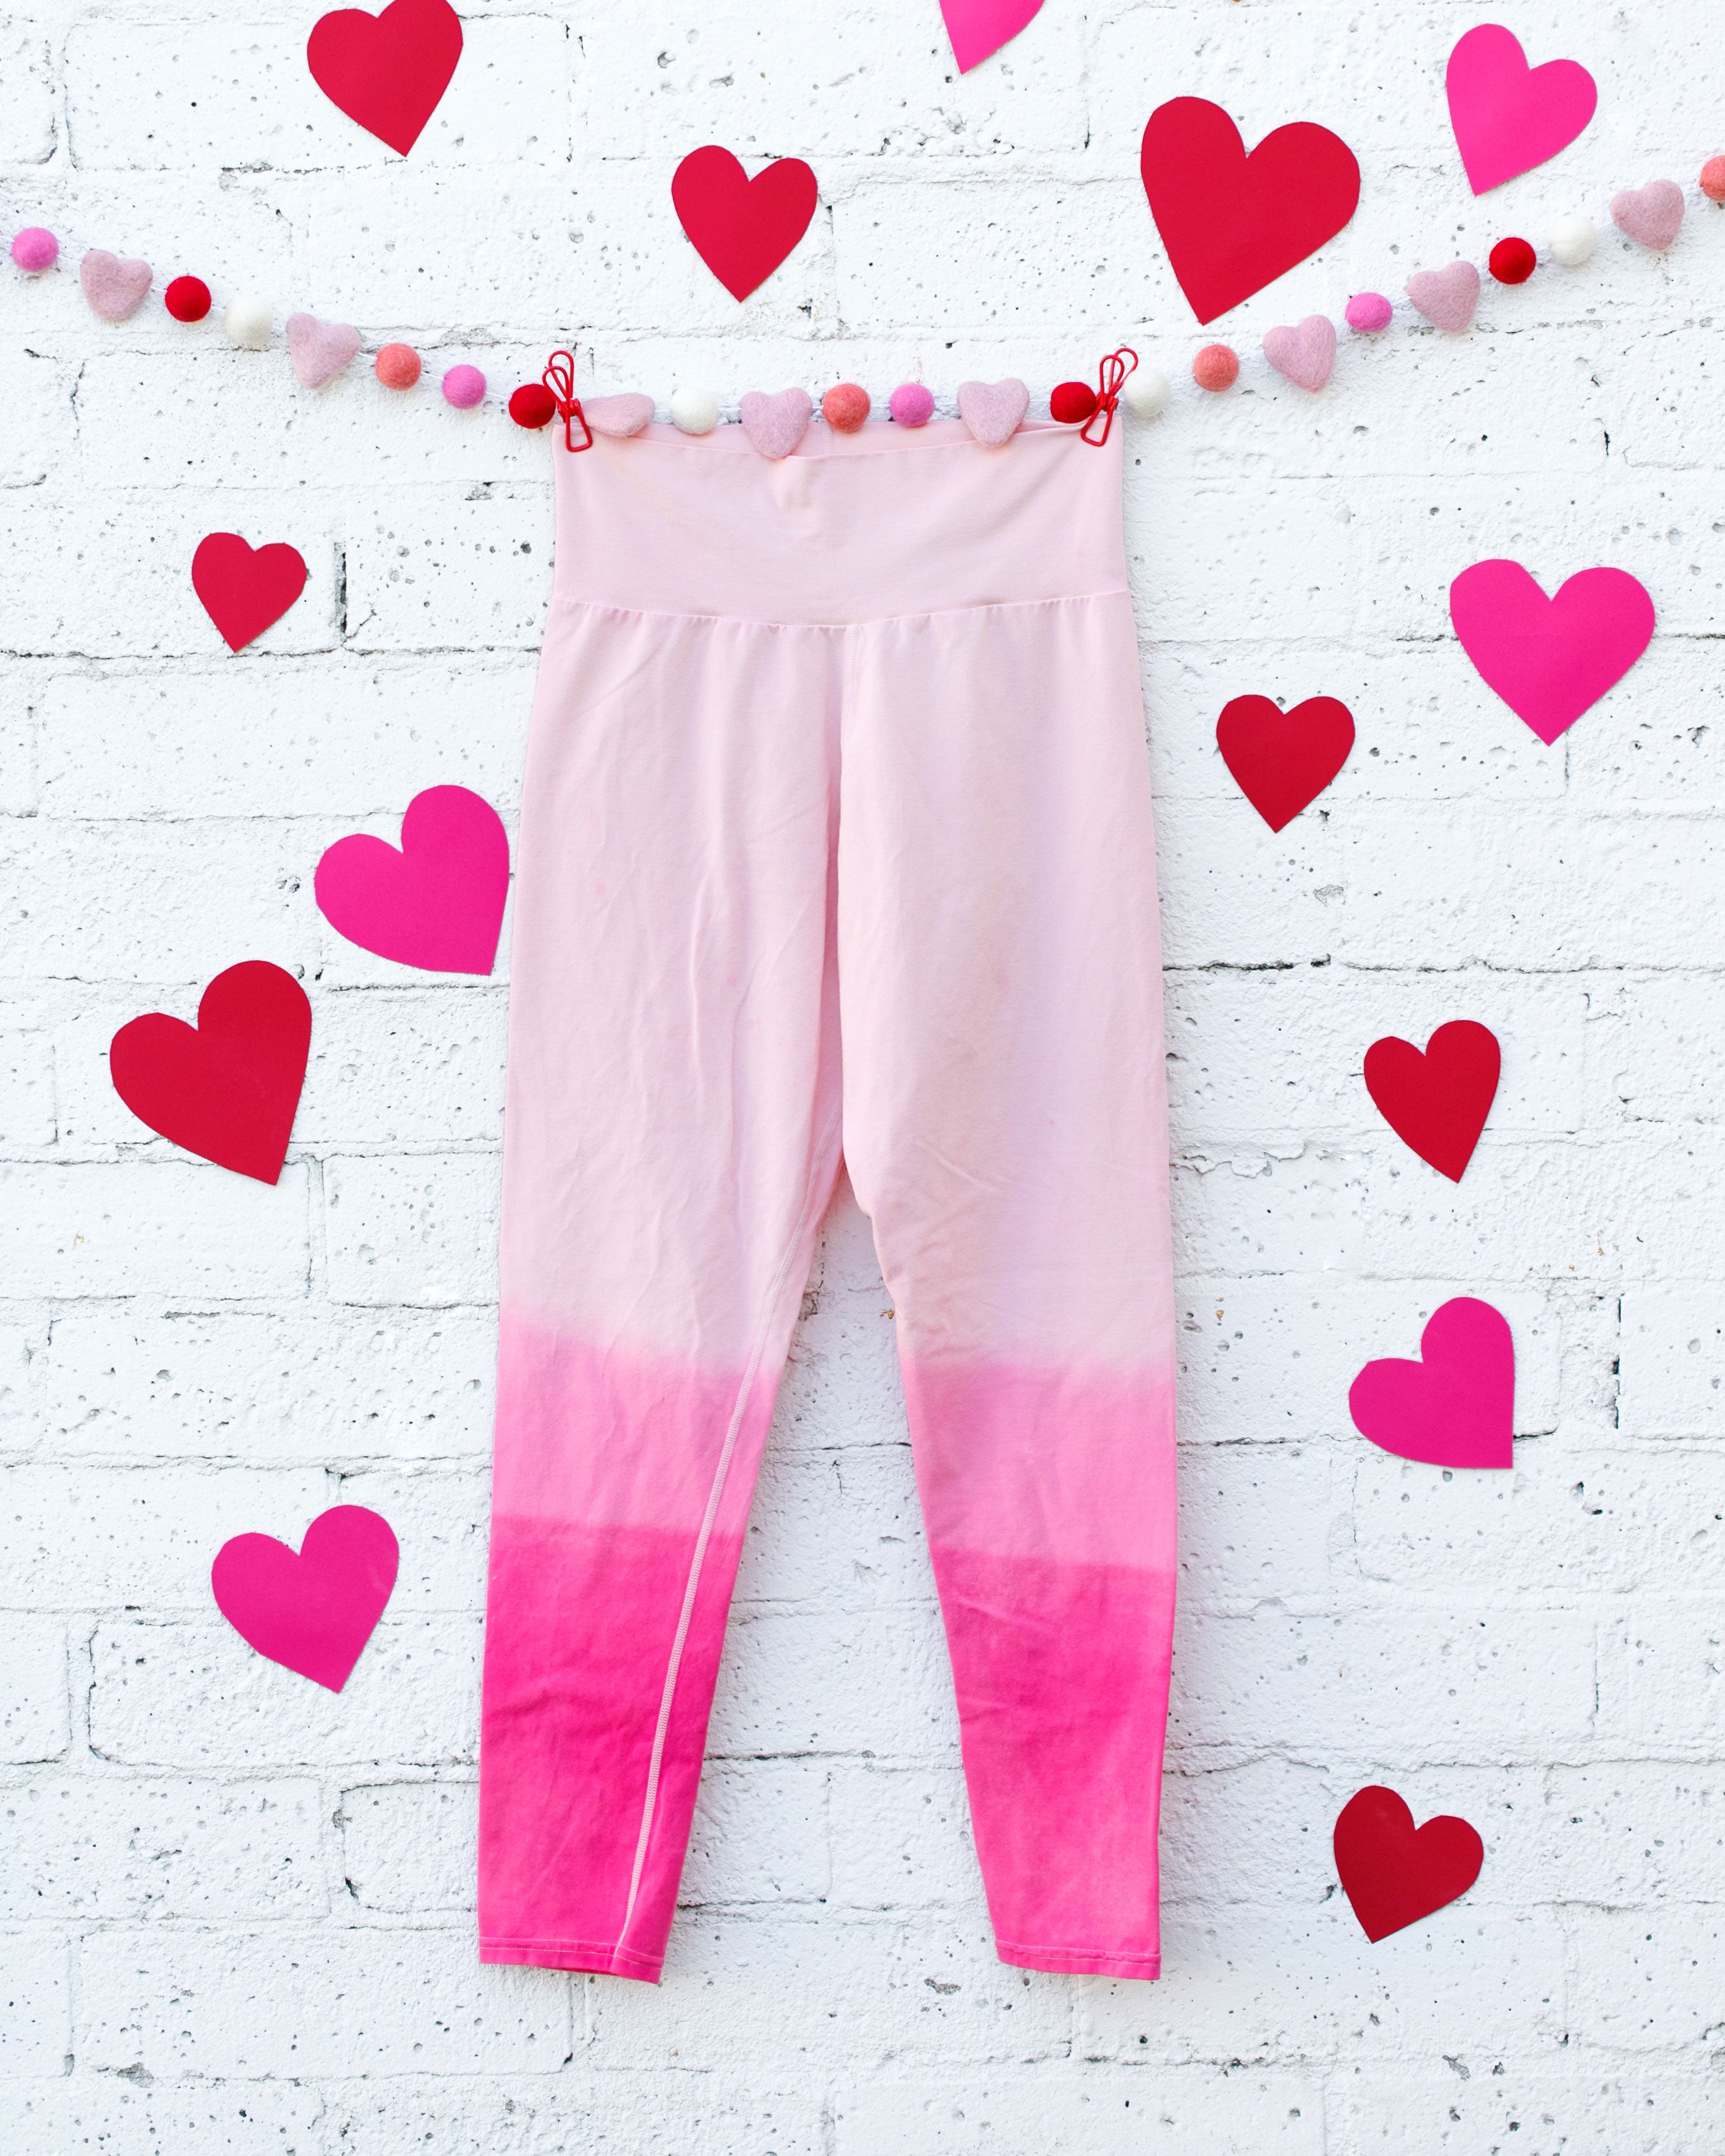 Photo of Thunderpants organic cotton Leggings in Valentine's Day Dip Dye ombre pinks.